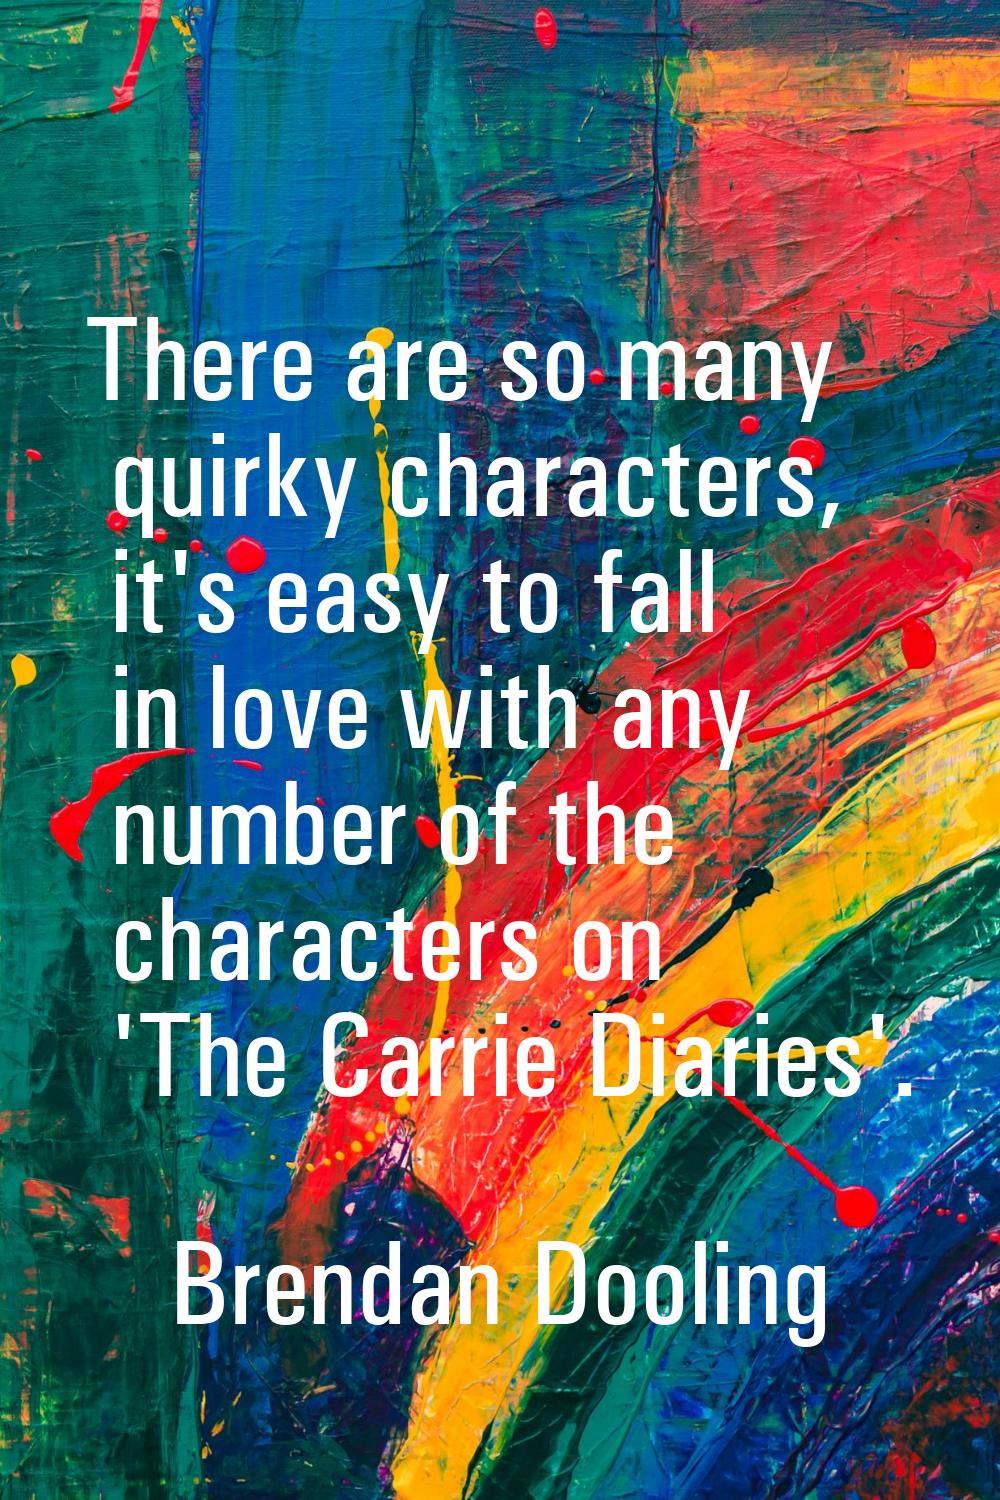 There are so many quirky characters, it's easy to fall in love with any number of the characters on